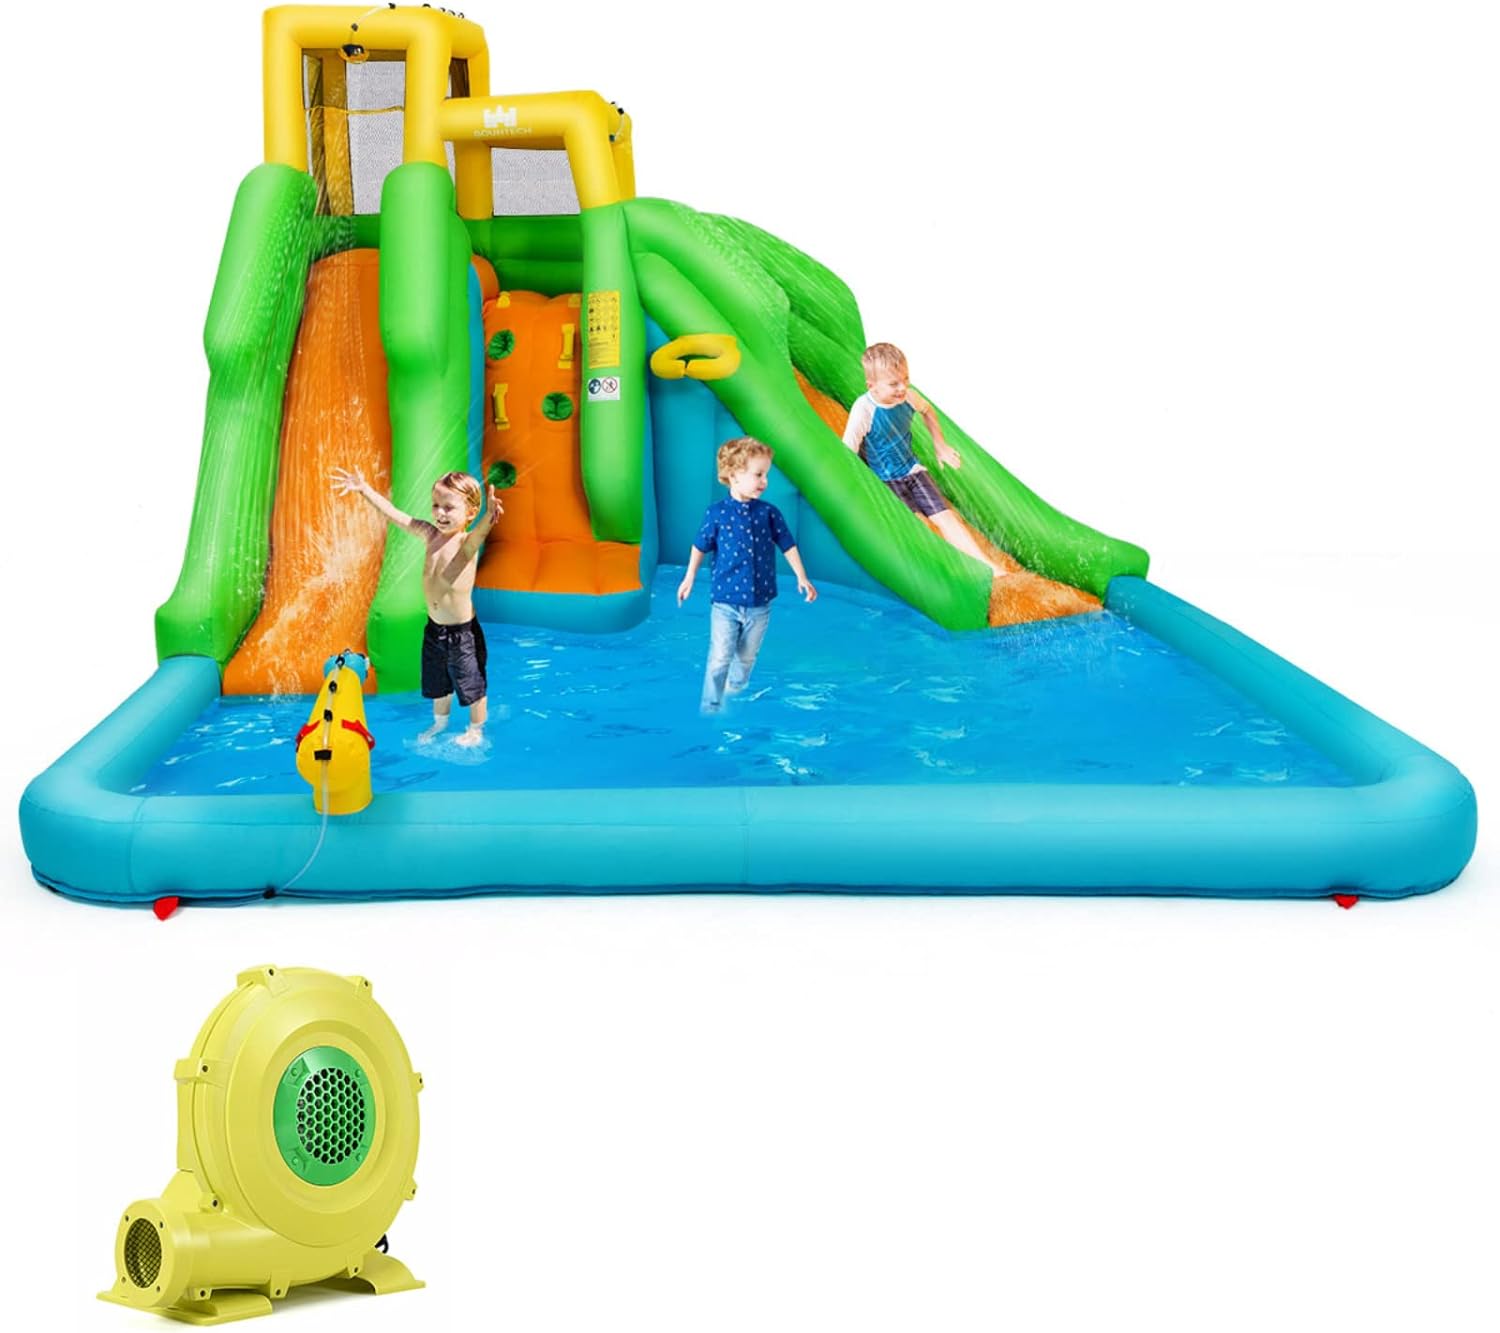 BOUNTECH Inflatable Water Slide, 6 in 1 Giant Waterslide Park for Kids Outdoor Fun with 480W Blower, 2 Slides, Splash Pool, Blow up Water Slides Inflatables for Kids and Adults Backyard Party Gifts